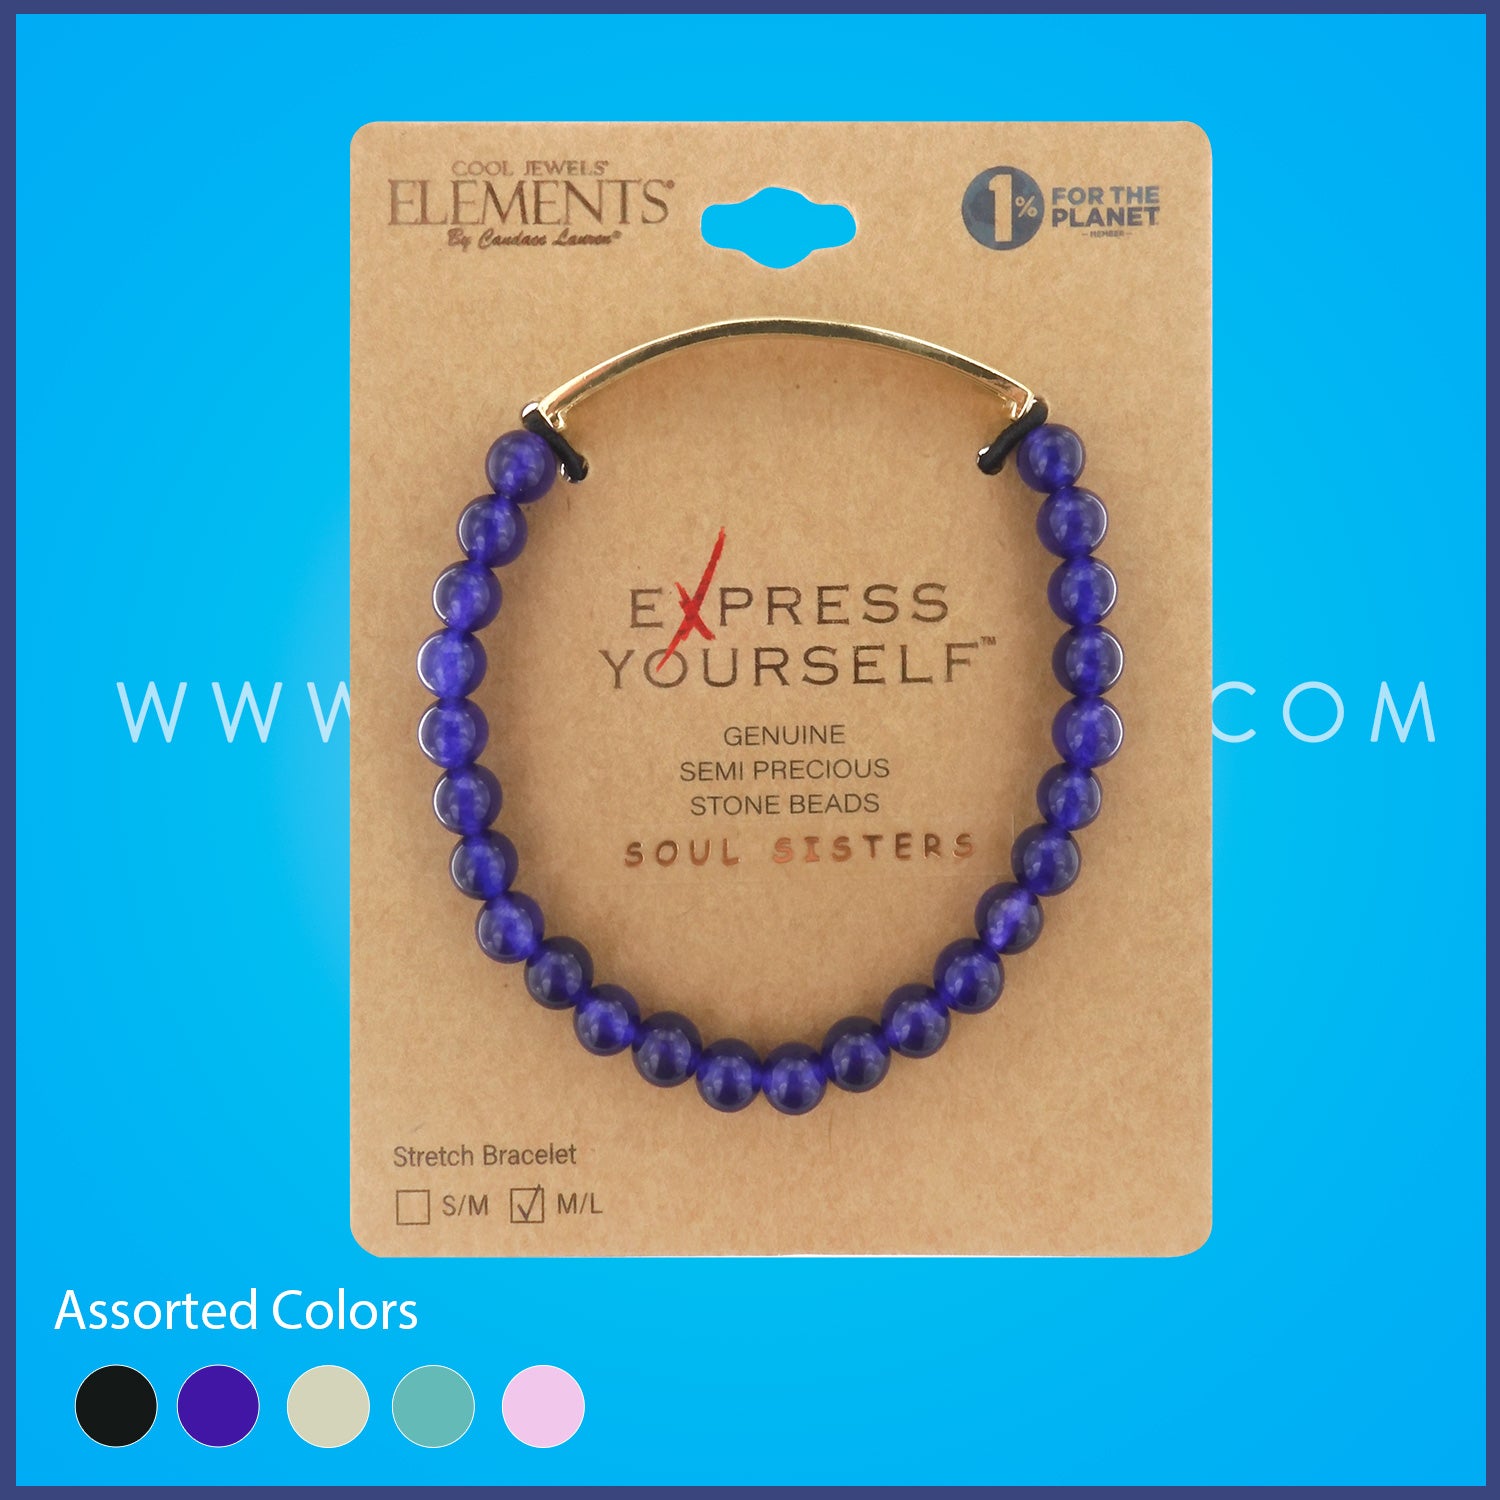 STRETCH BRACELET WITH STONE BEADS & EXPRESSION BAR "SOUL SISTERS"